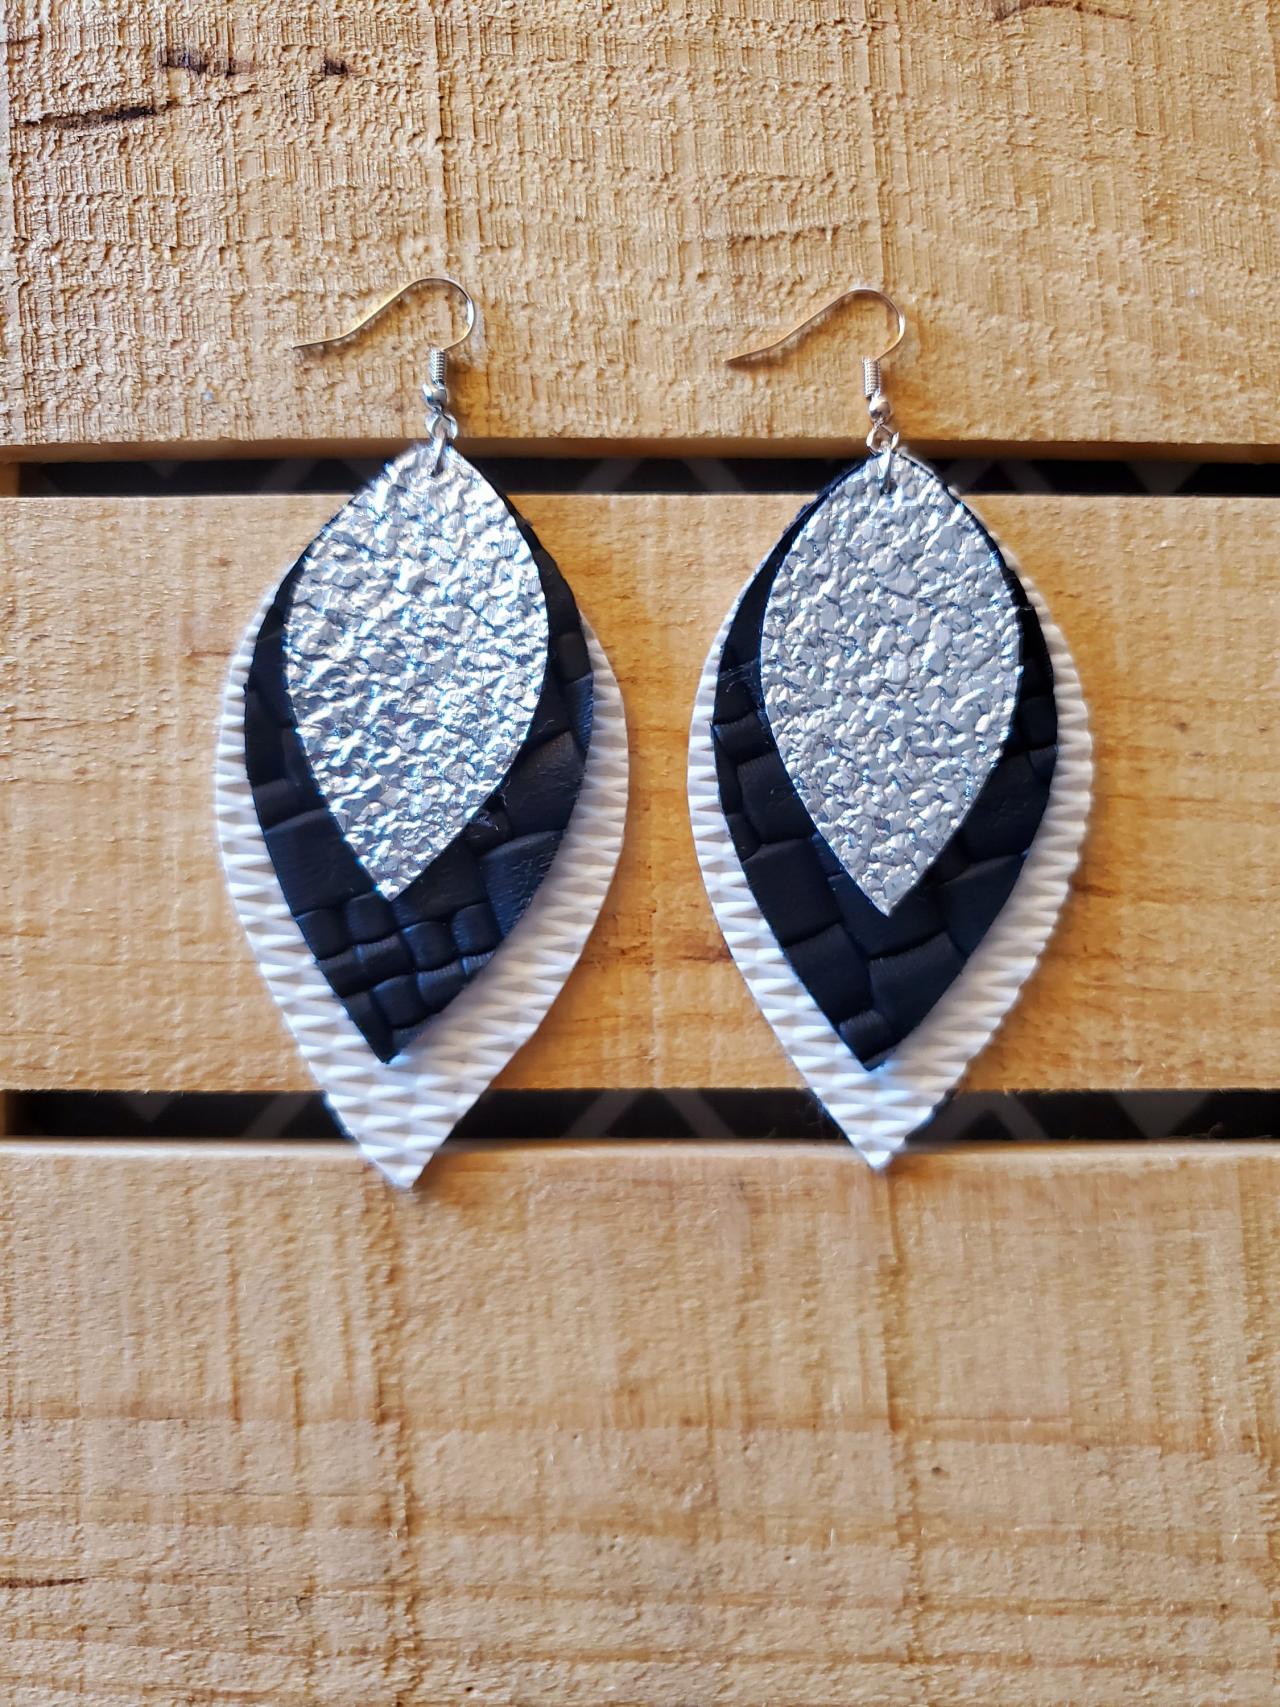 Triple Layered Leather Earrings, Black White And Silver Leather Earrings, Boho Chic Jewelry, Statement Earrings, Trendy Jewelry, Gift